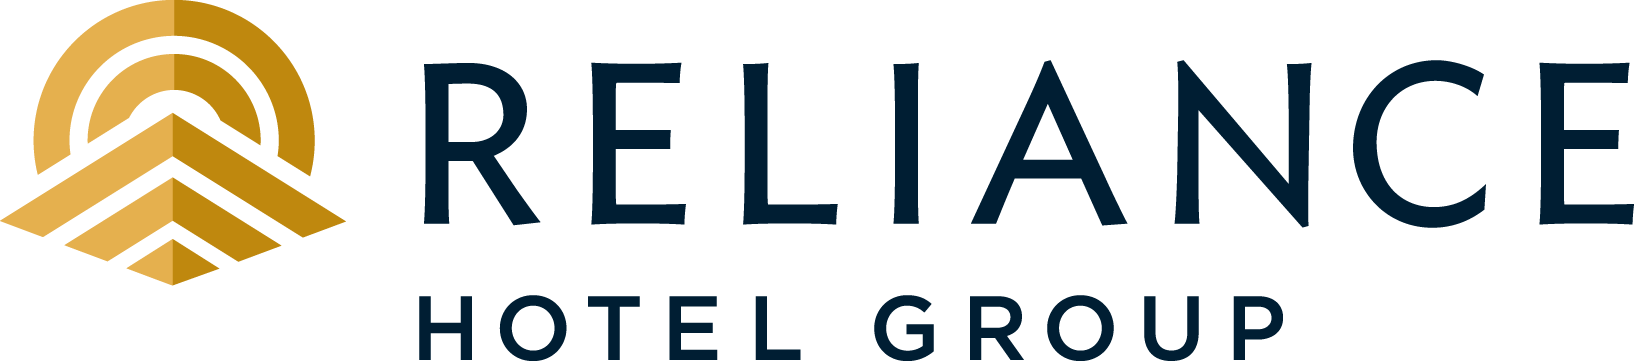 Reliance Hotel Group